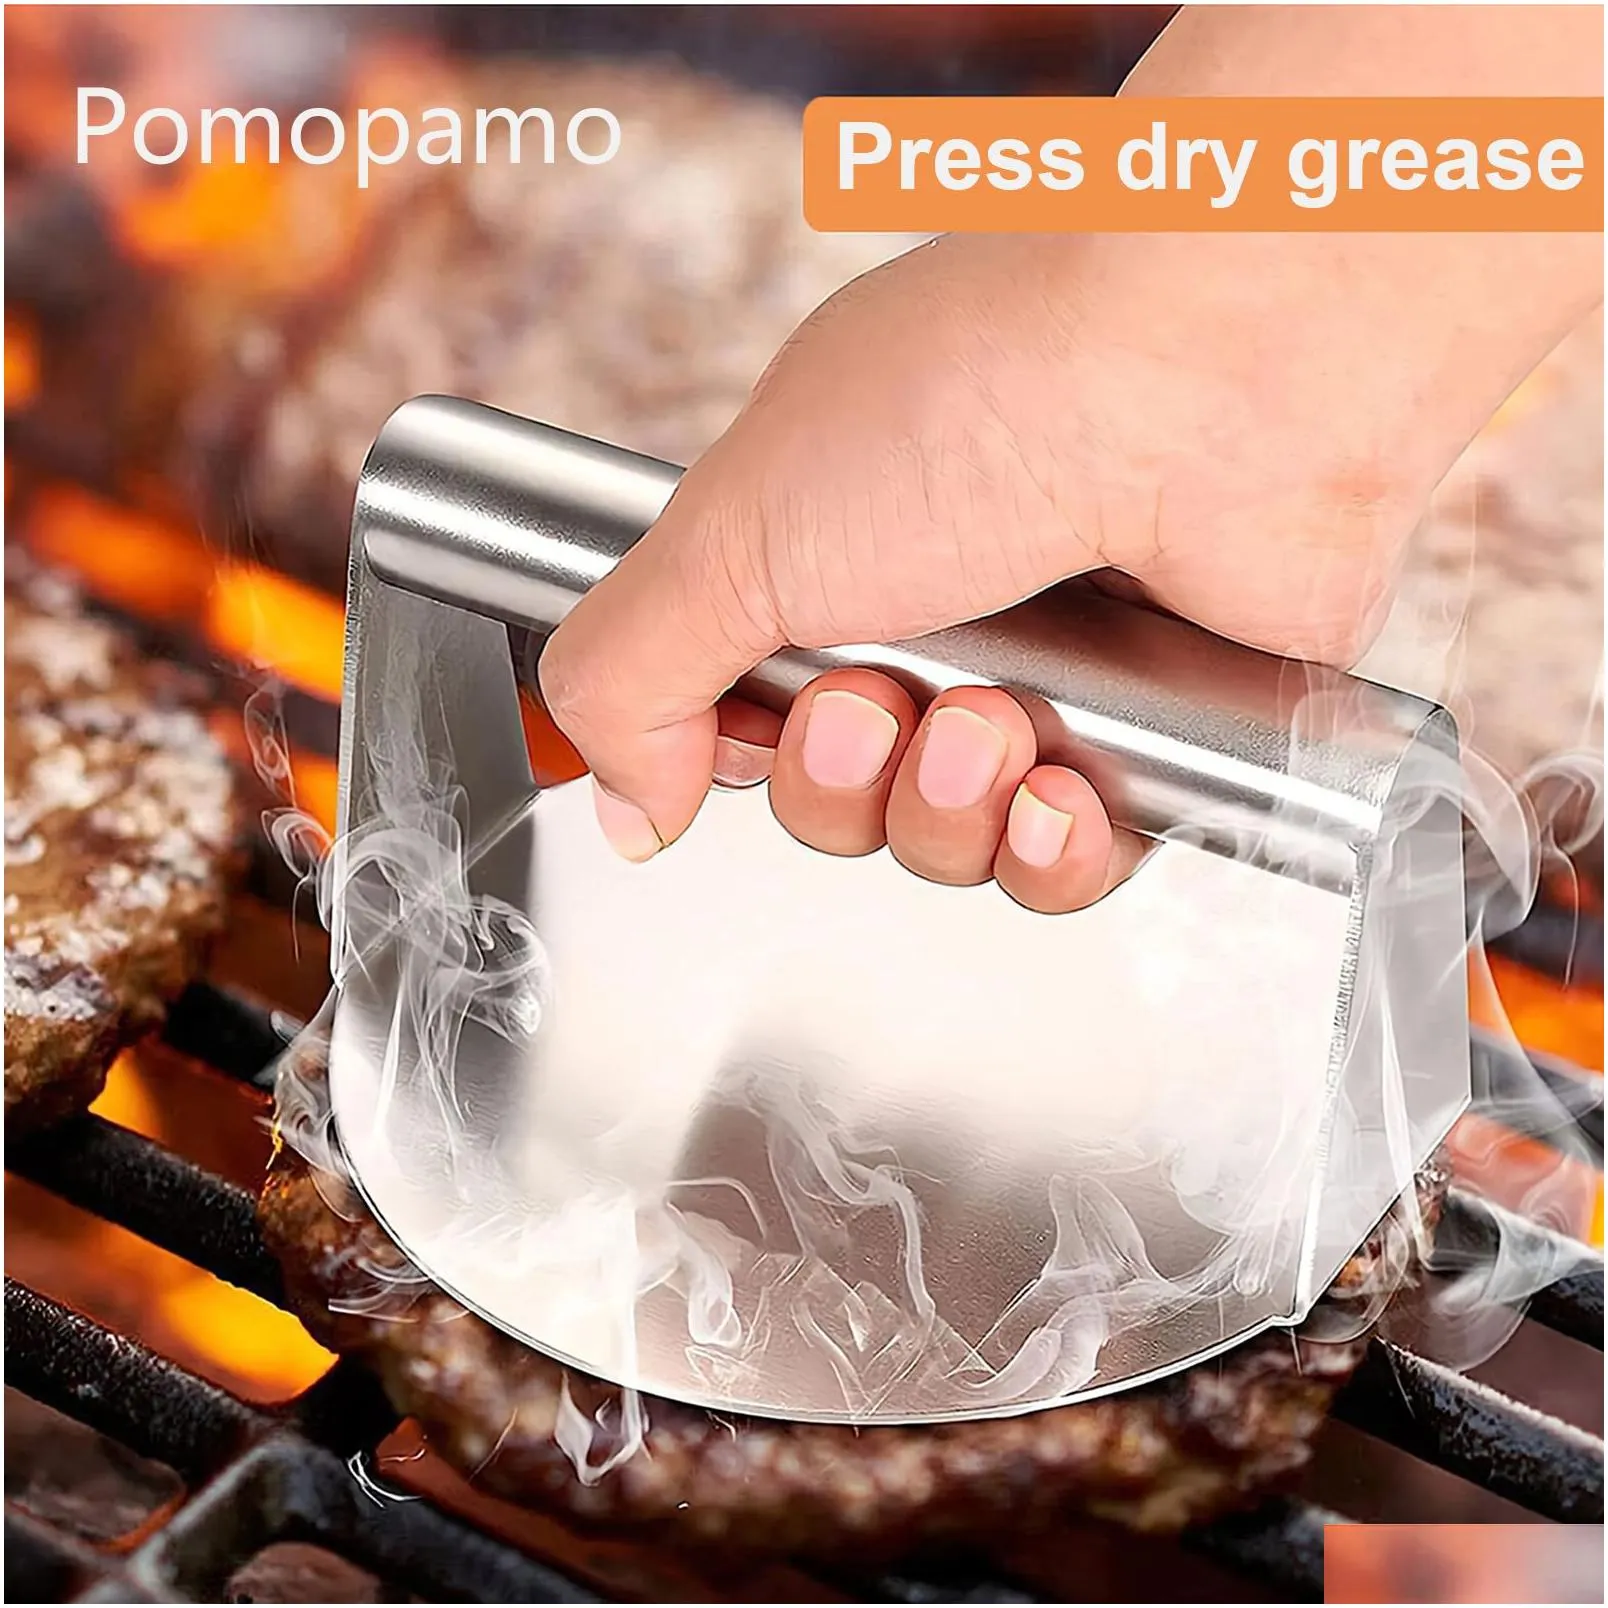 burger press stainless steel 5.5 in heavy duty durable grill hamburger smasher for professional home cooks, outdoor indoor kitchen grilling